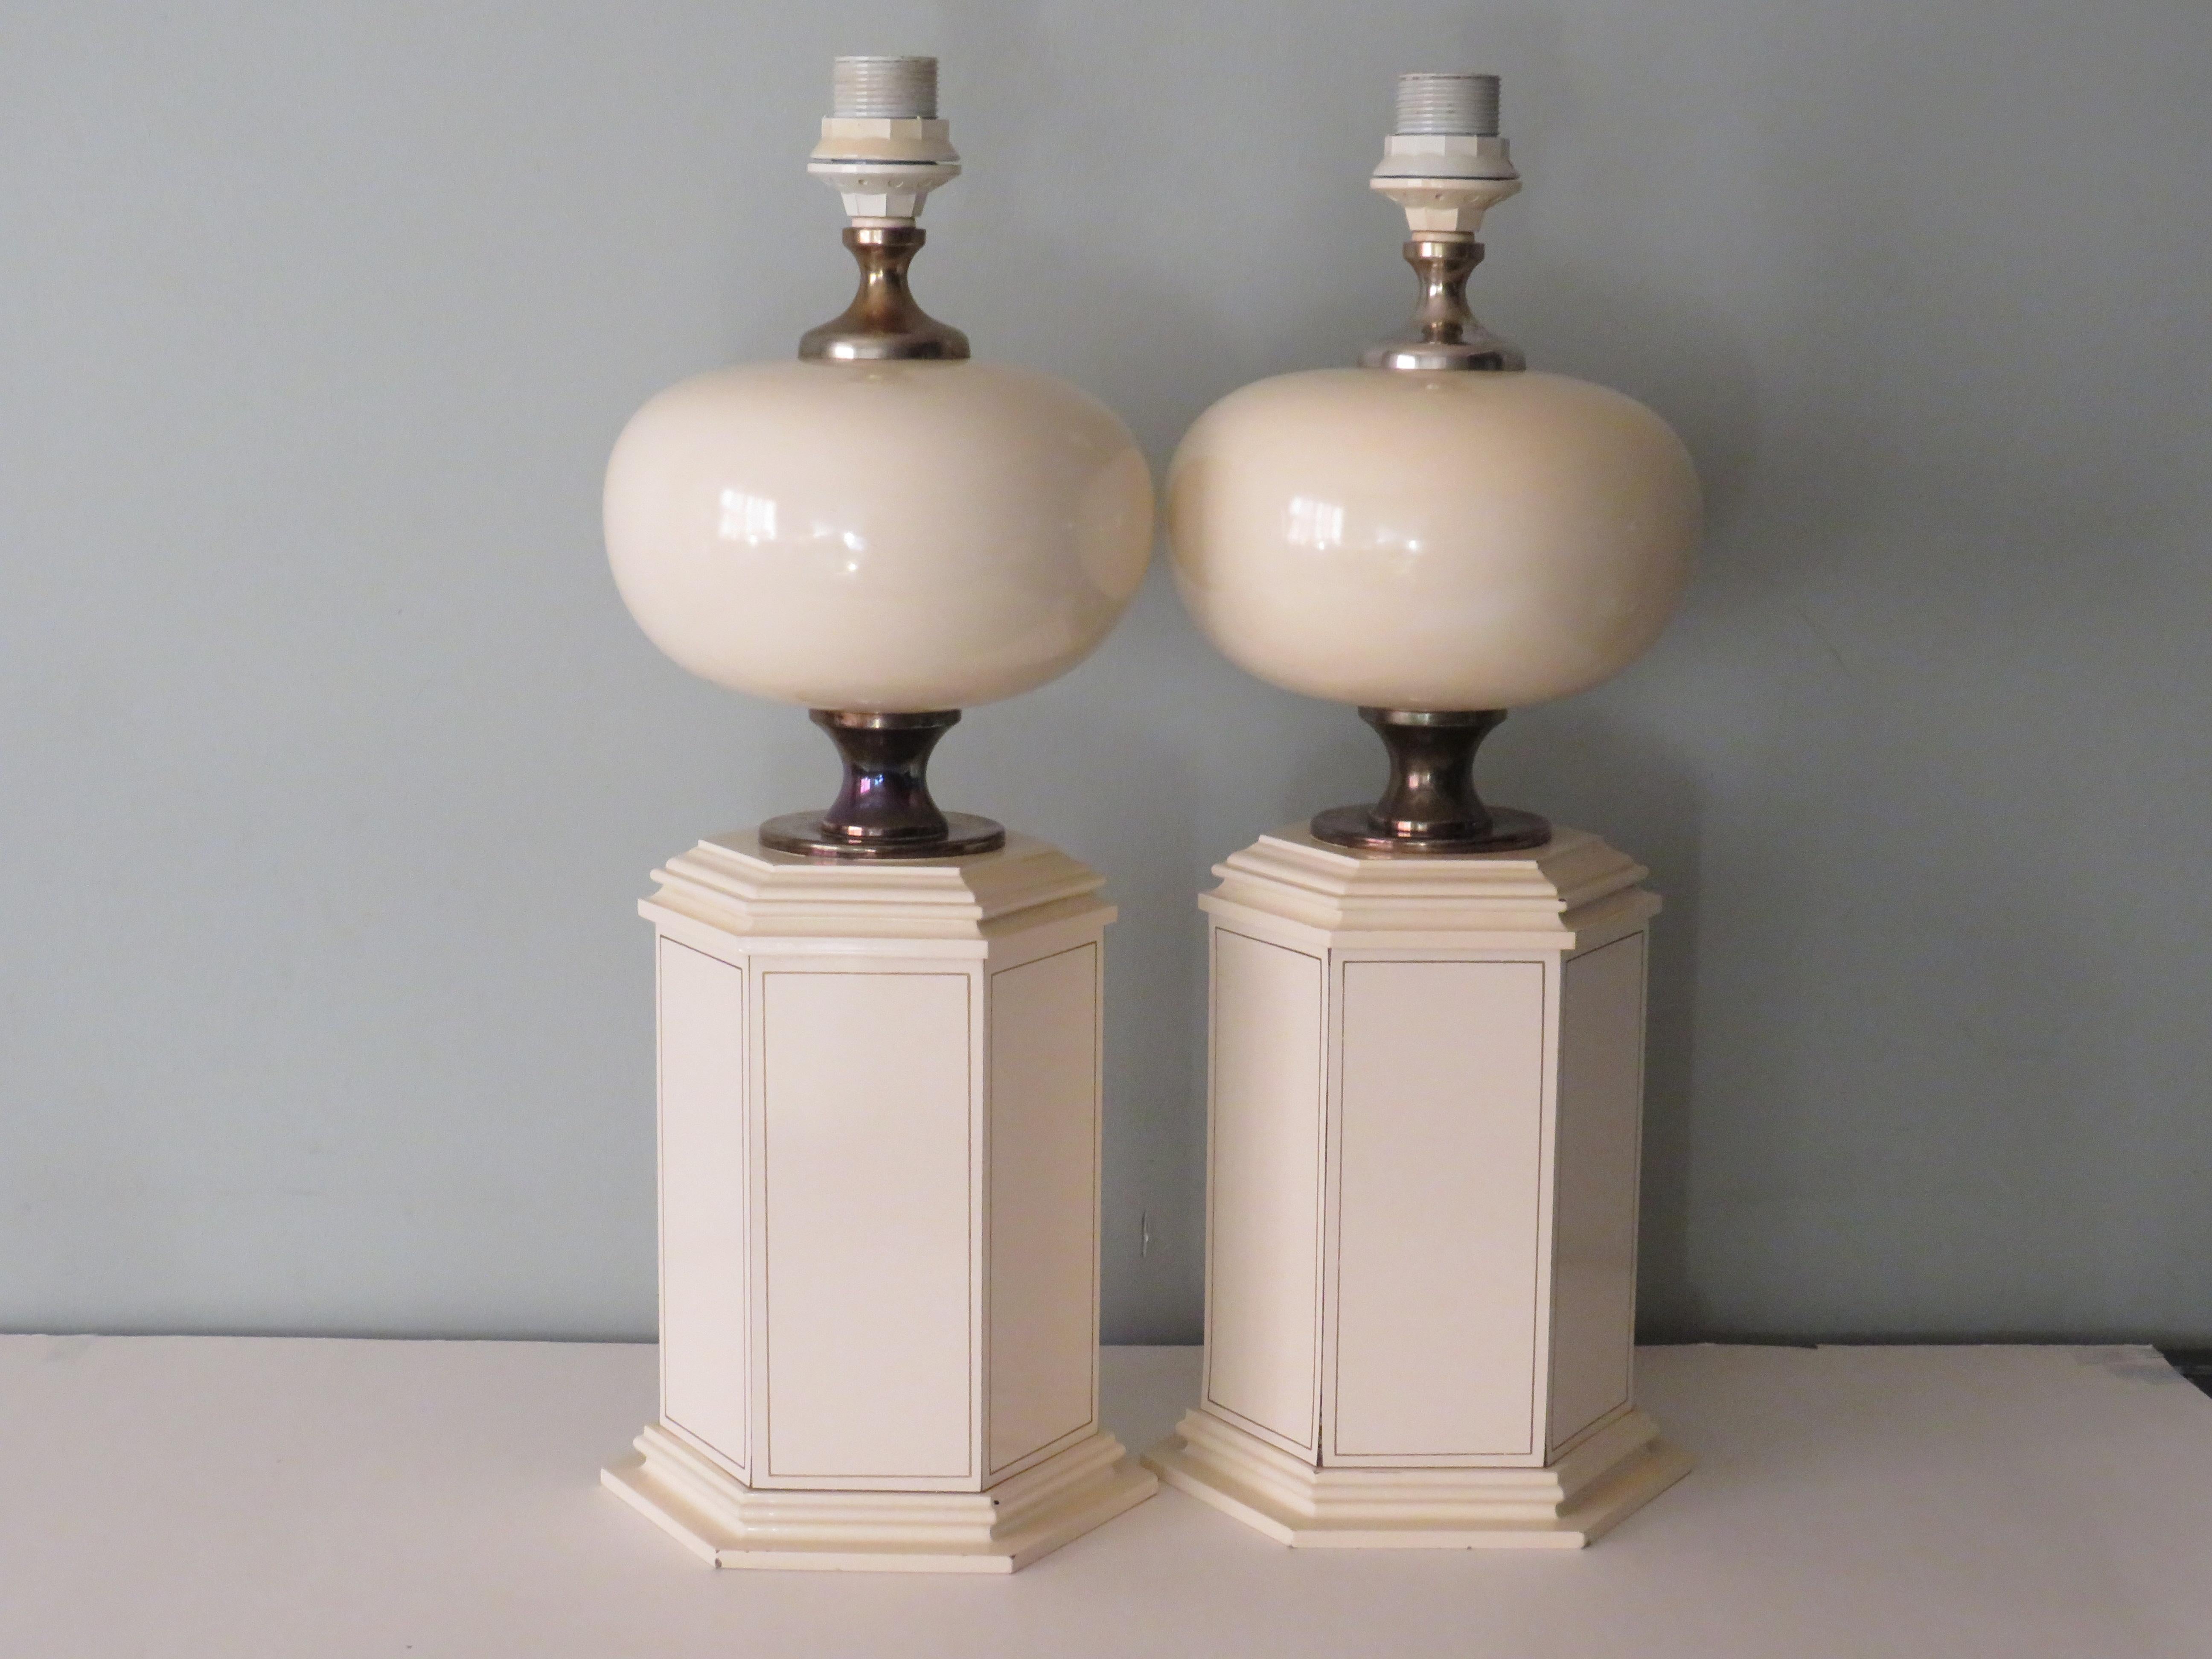 Set of 2 elegant lamps with hexagonal base in laminated wood and a metal spherical shape and spacers in brass.
The lamps have a creamy white color and the hexagonal panels have a gold-colored line. They have an E 14 fitting and a white cord with an